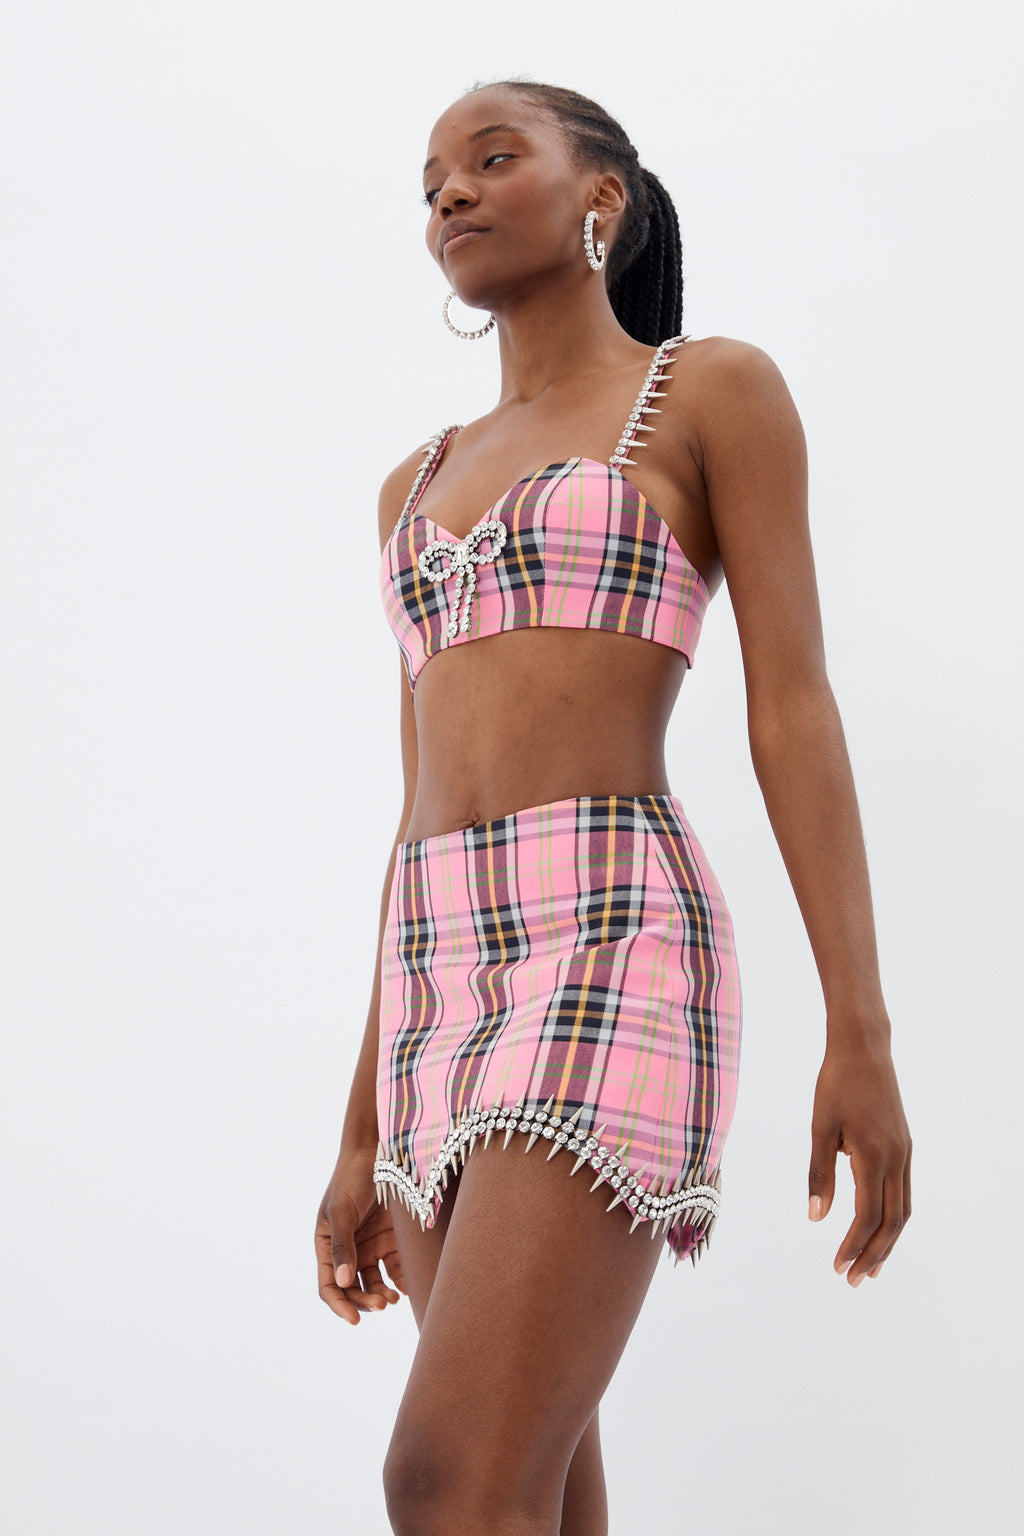 AREA Crystal Trim Bra Top in Pink Plaid, Pink. Size 0 (also in ).